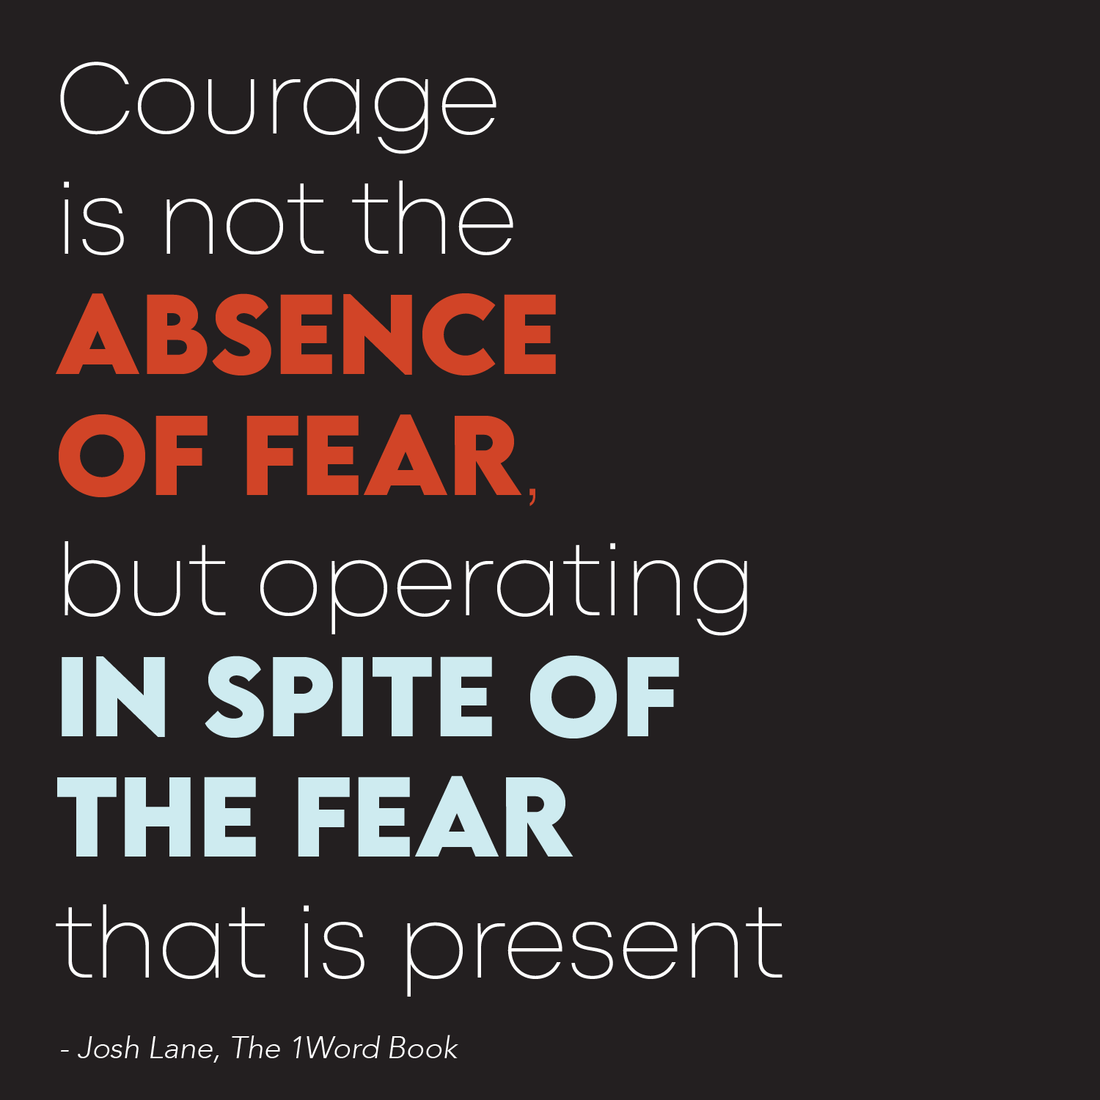 Is courage really the absence of fear?